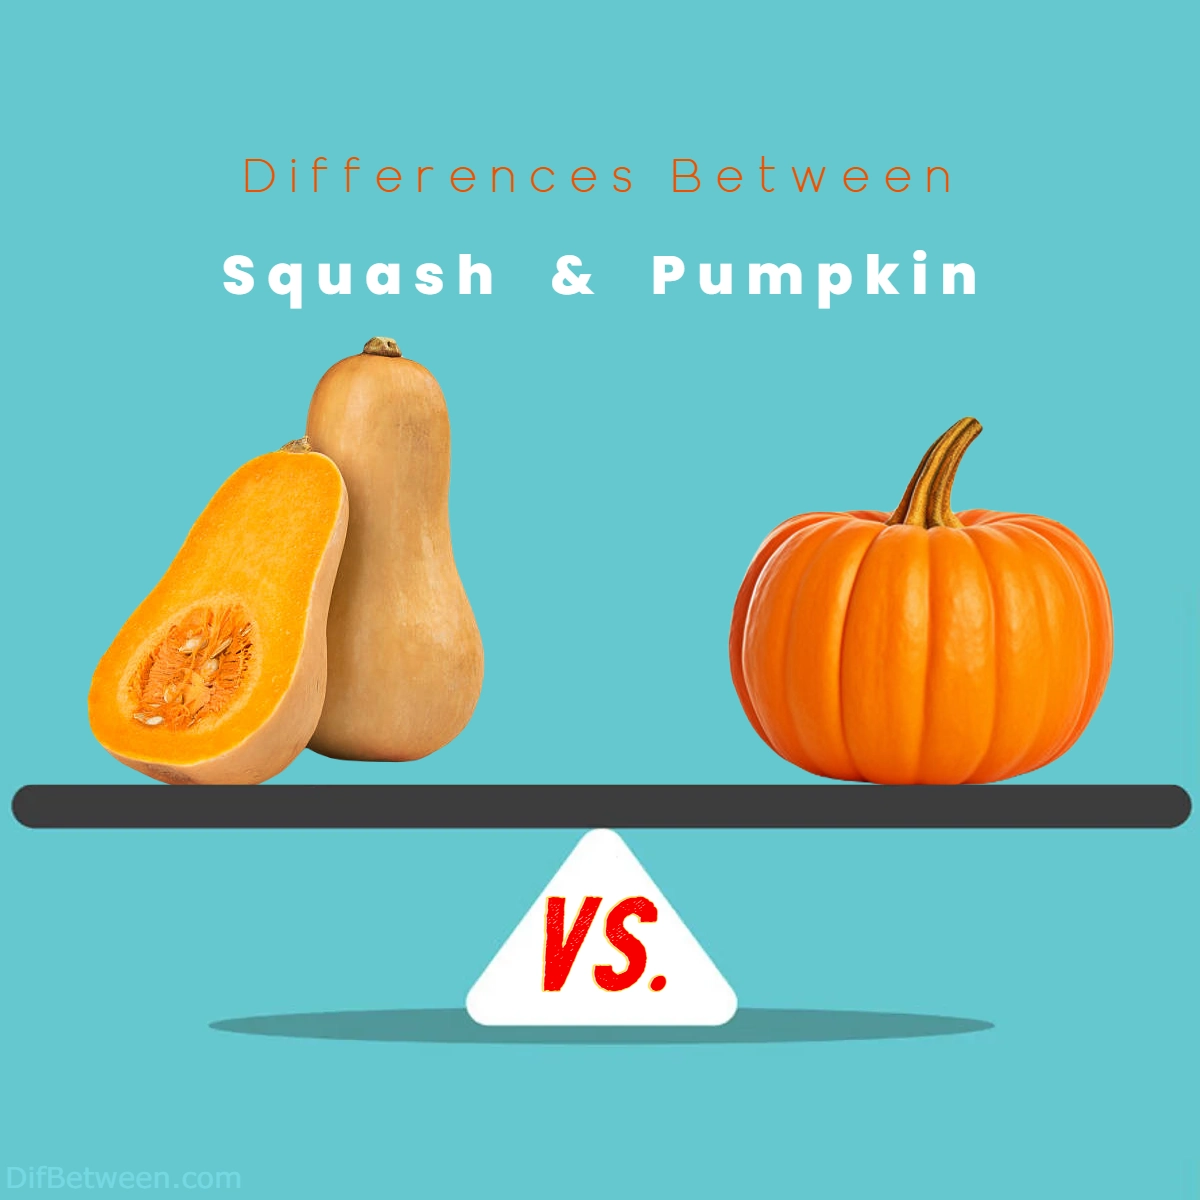 Difference Between Squash and Pumpkin